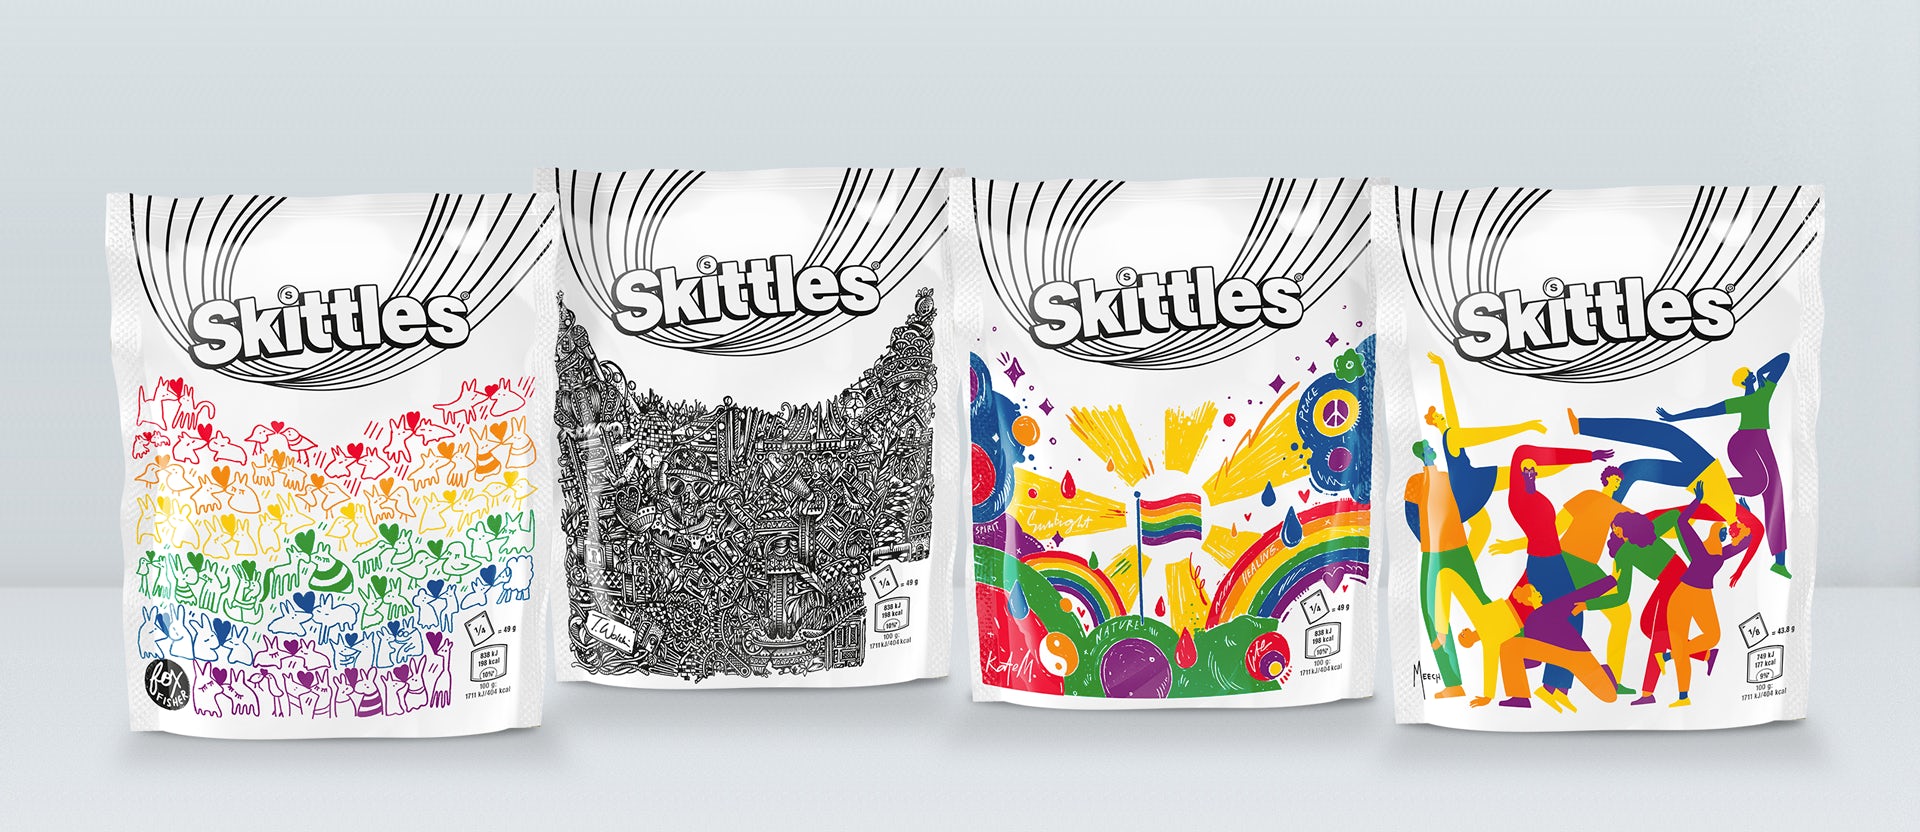 Skittles teams up with LGBTQ+ artists for Pride 2019